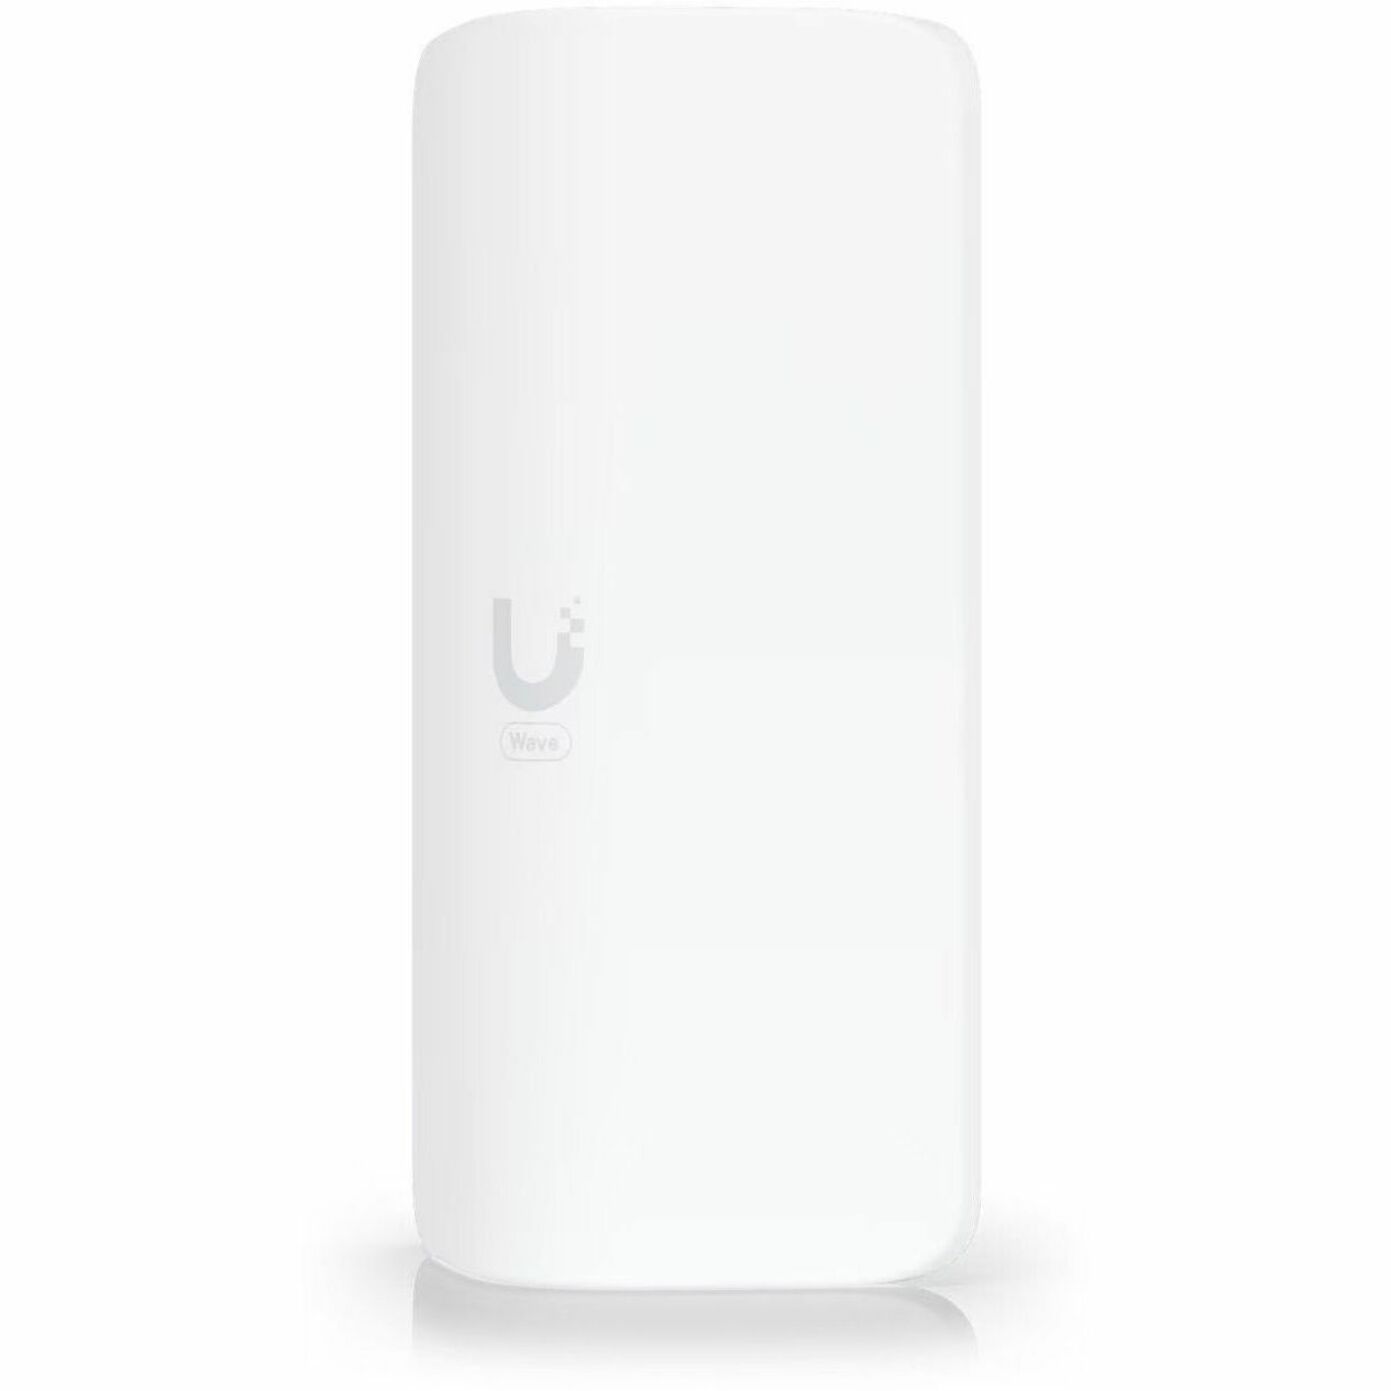 Ubiquiti WIDE-COVERAGE 60 GHZ PTMP ACCESS POINT (WAVE-AP-MICRO)